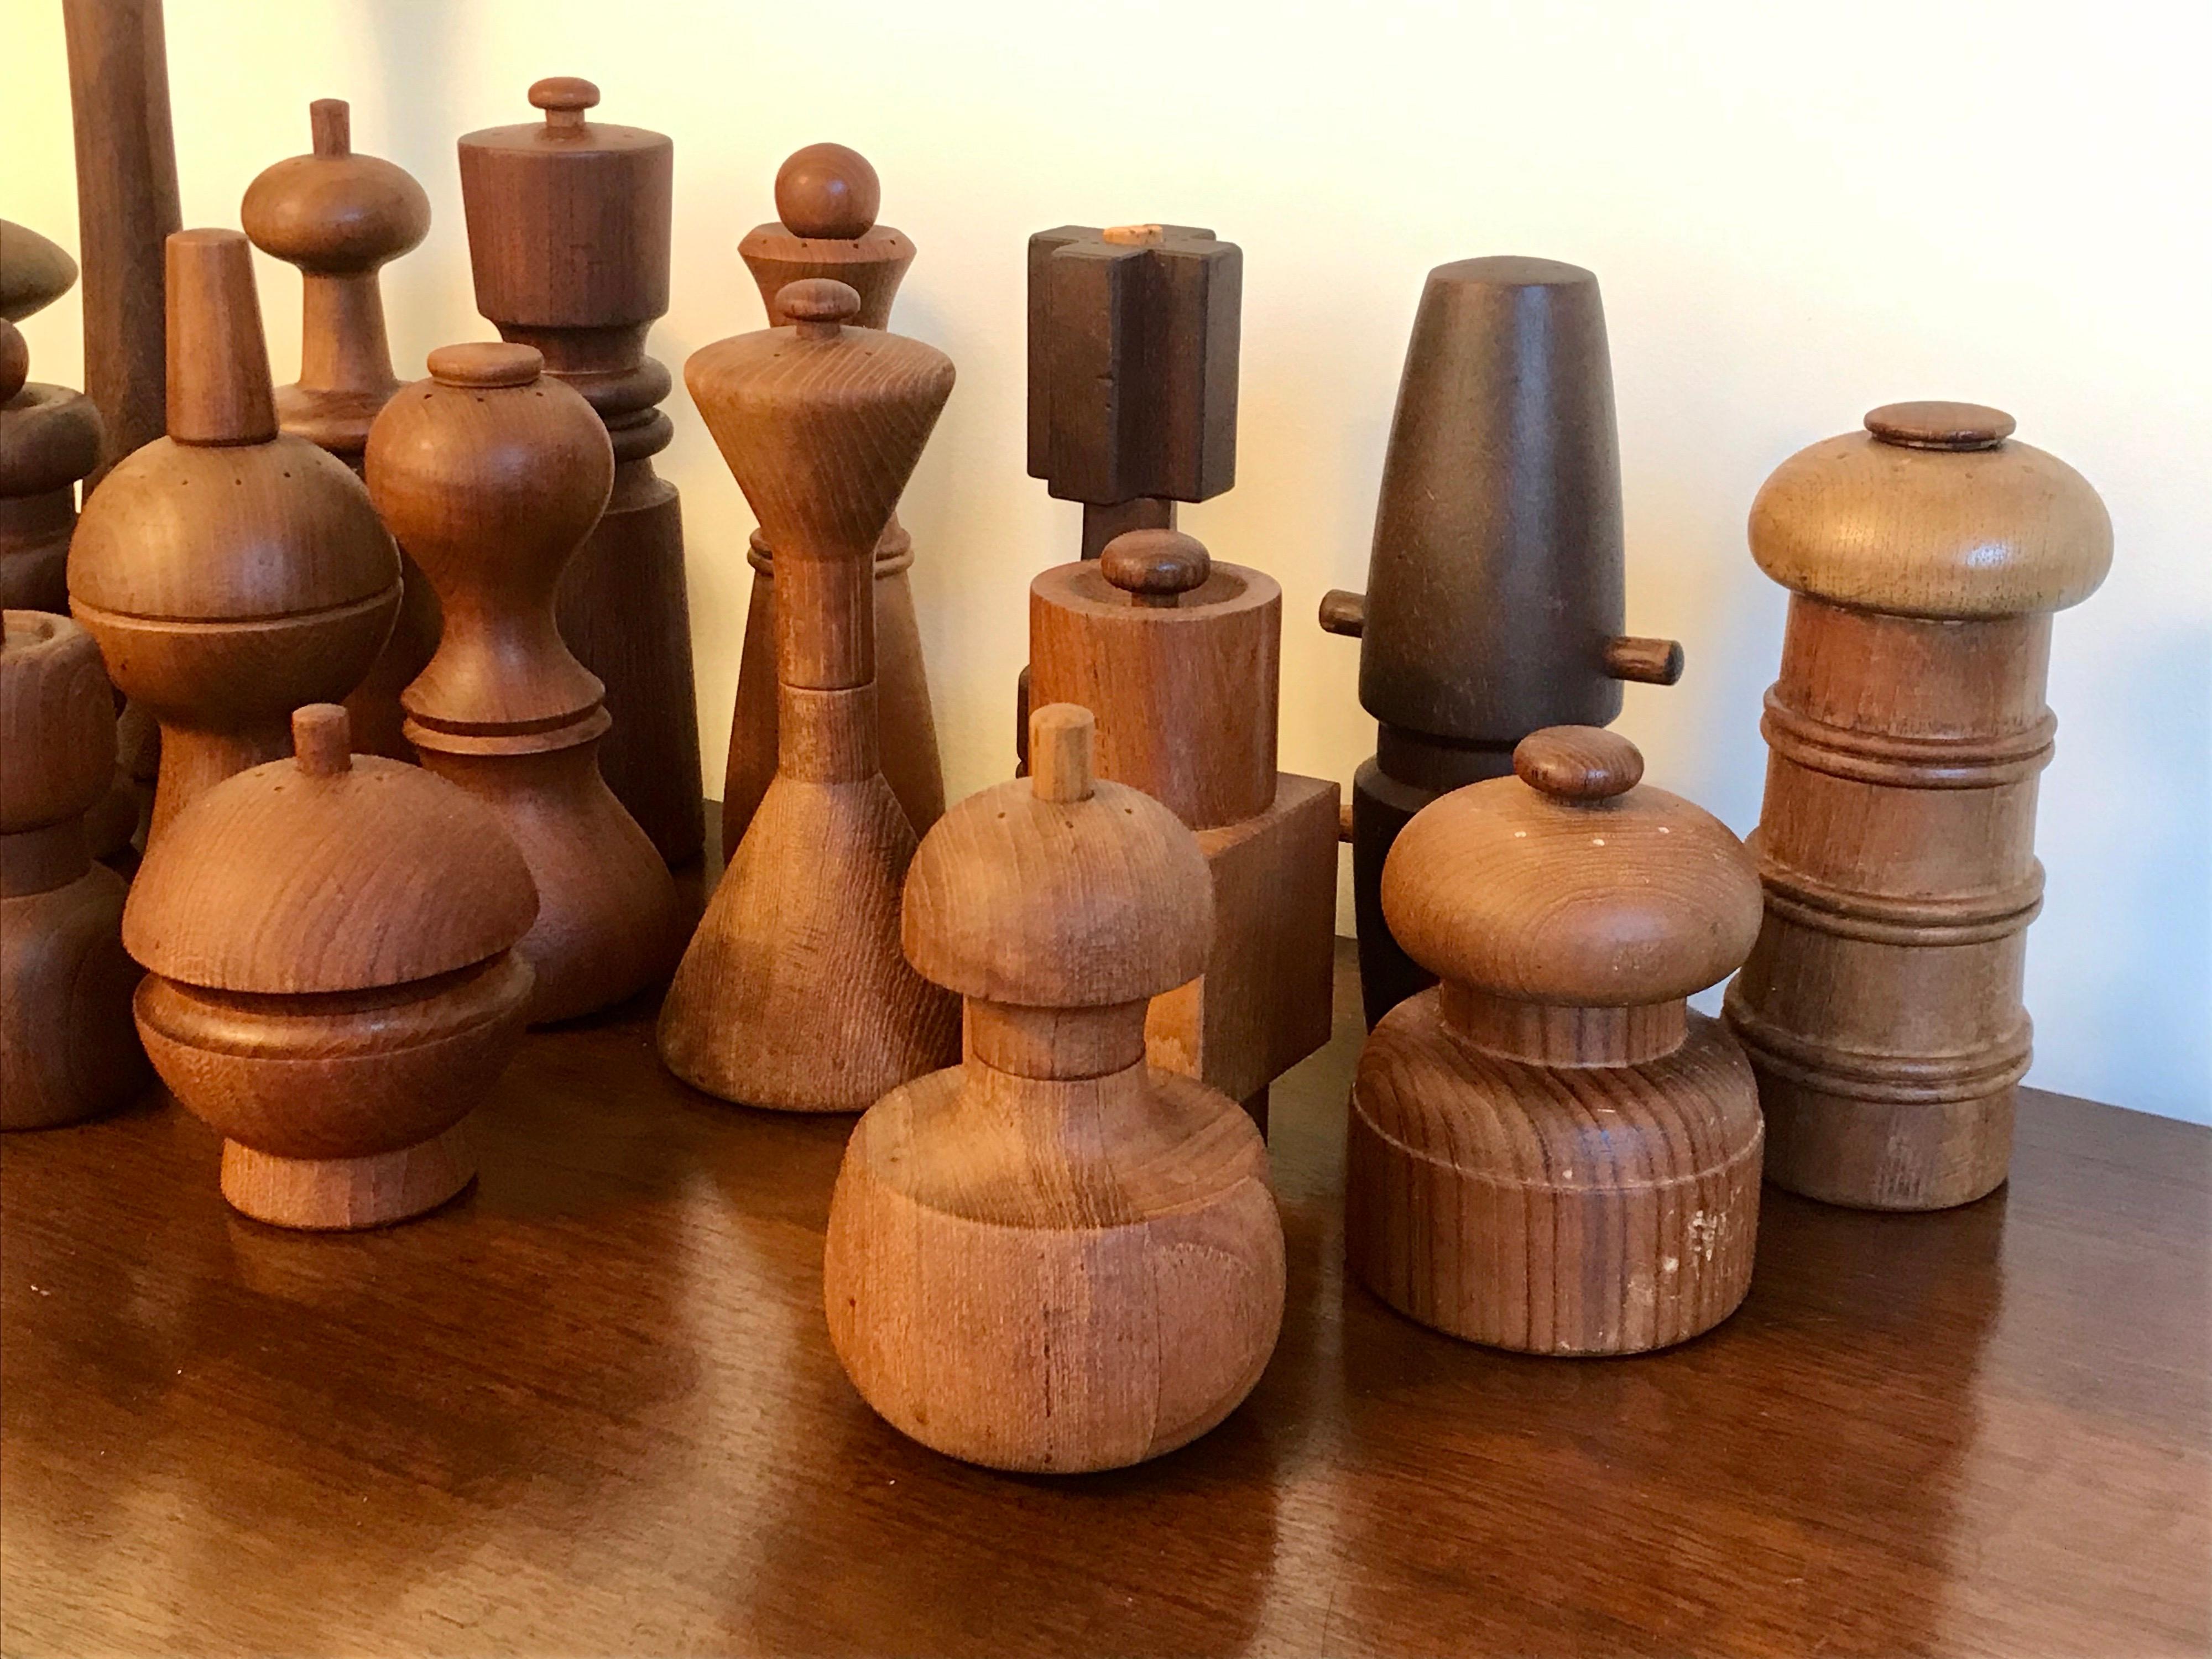 Nice form + function objet d'arts
These are all vintage grinders
Not new 
Stamped 